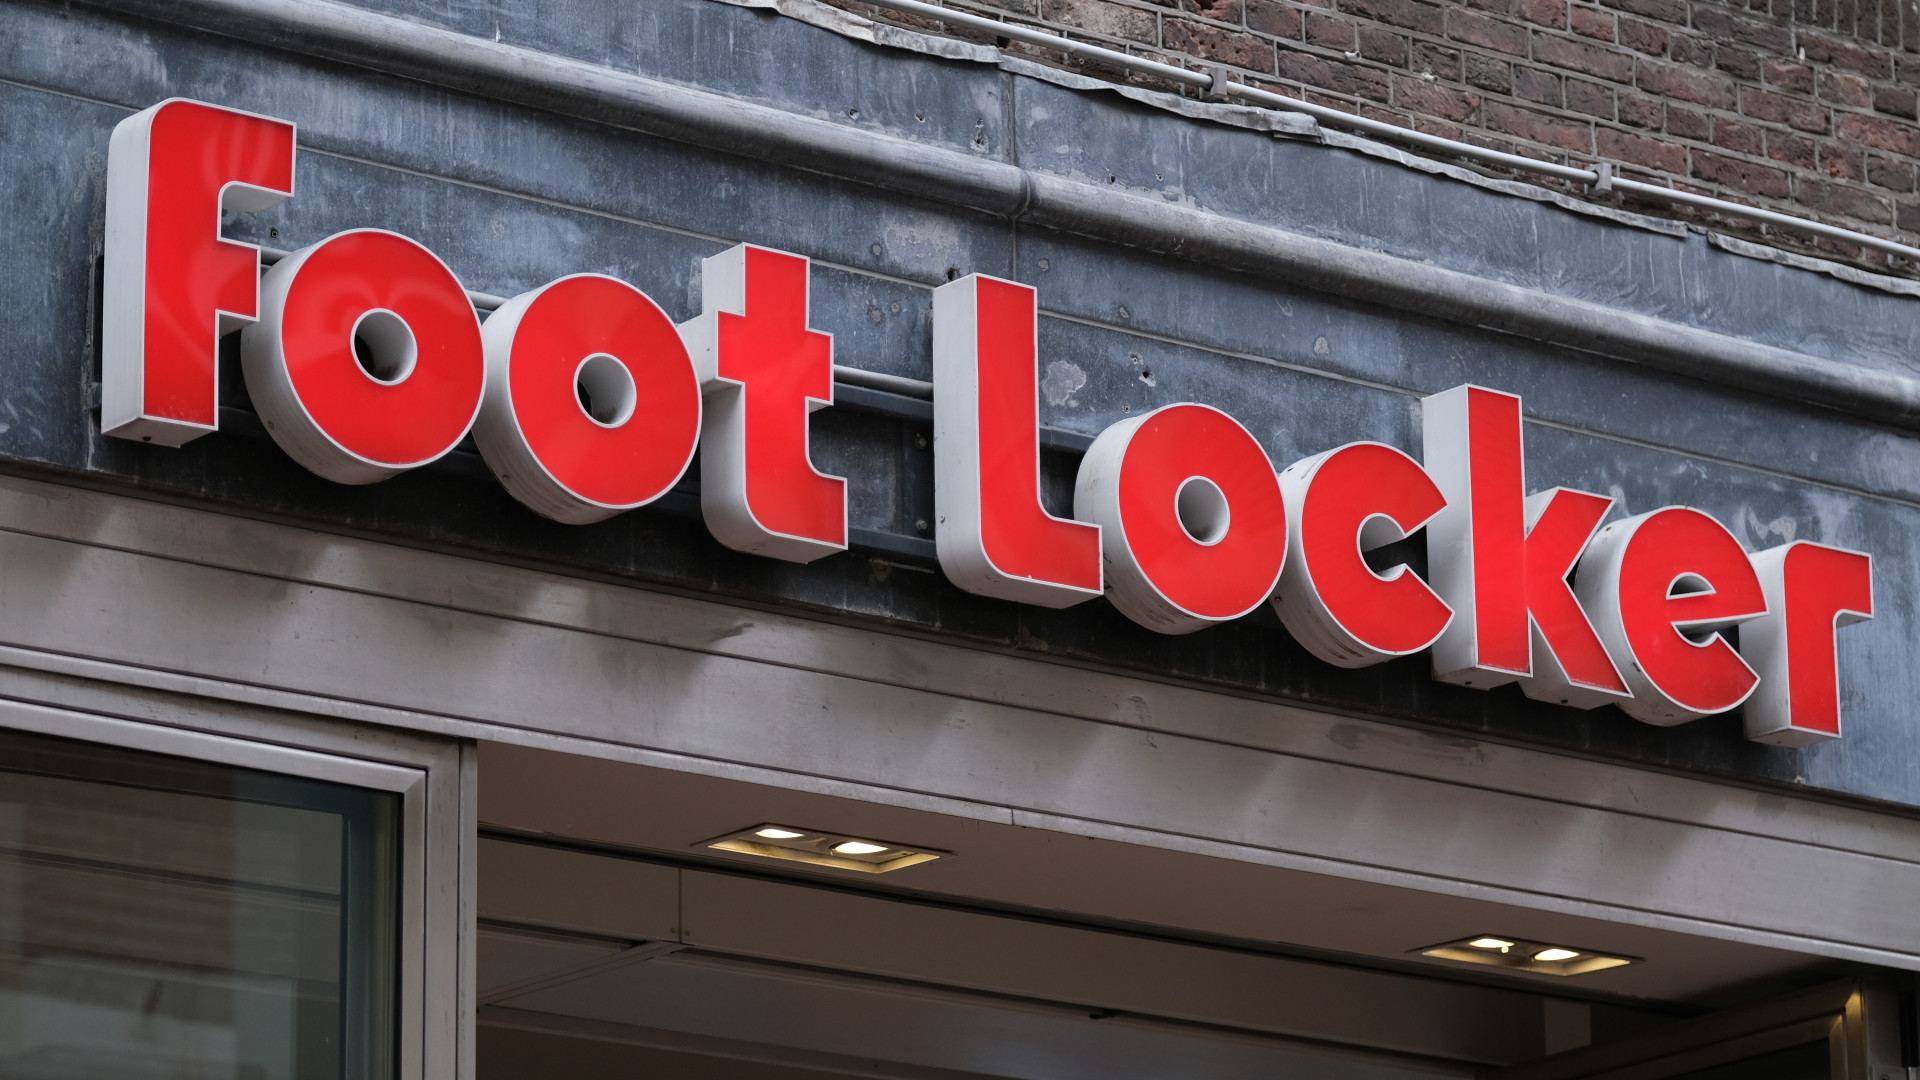 Foot Locker to Close Nearly 400 Mall Stores by 2026